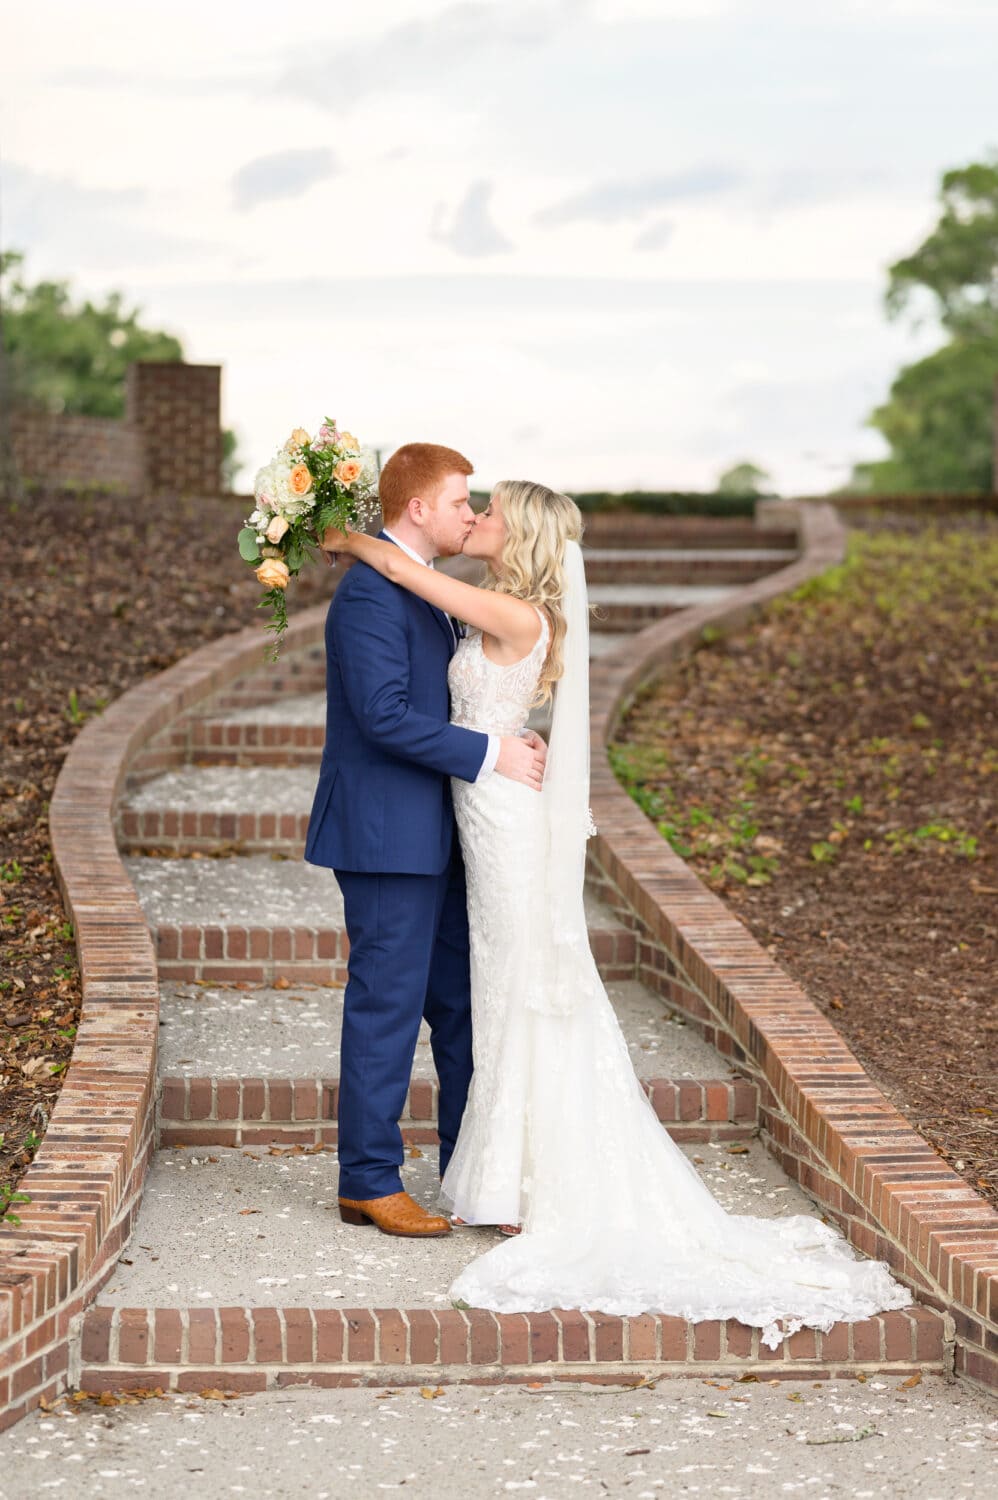 Kiss on the steps to the overlook - Dunes Golf and Beach Club